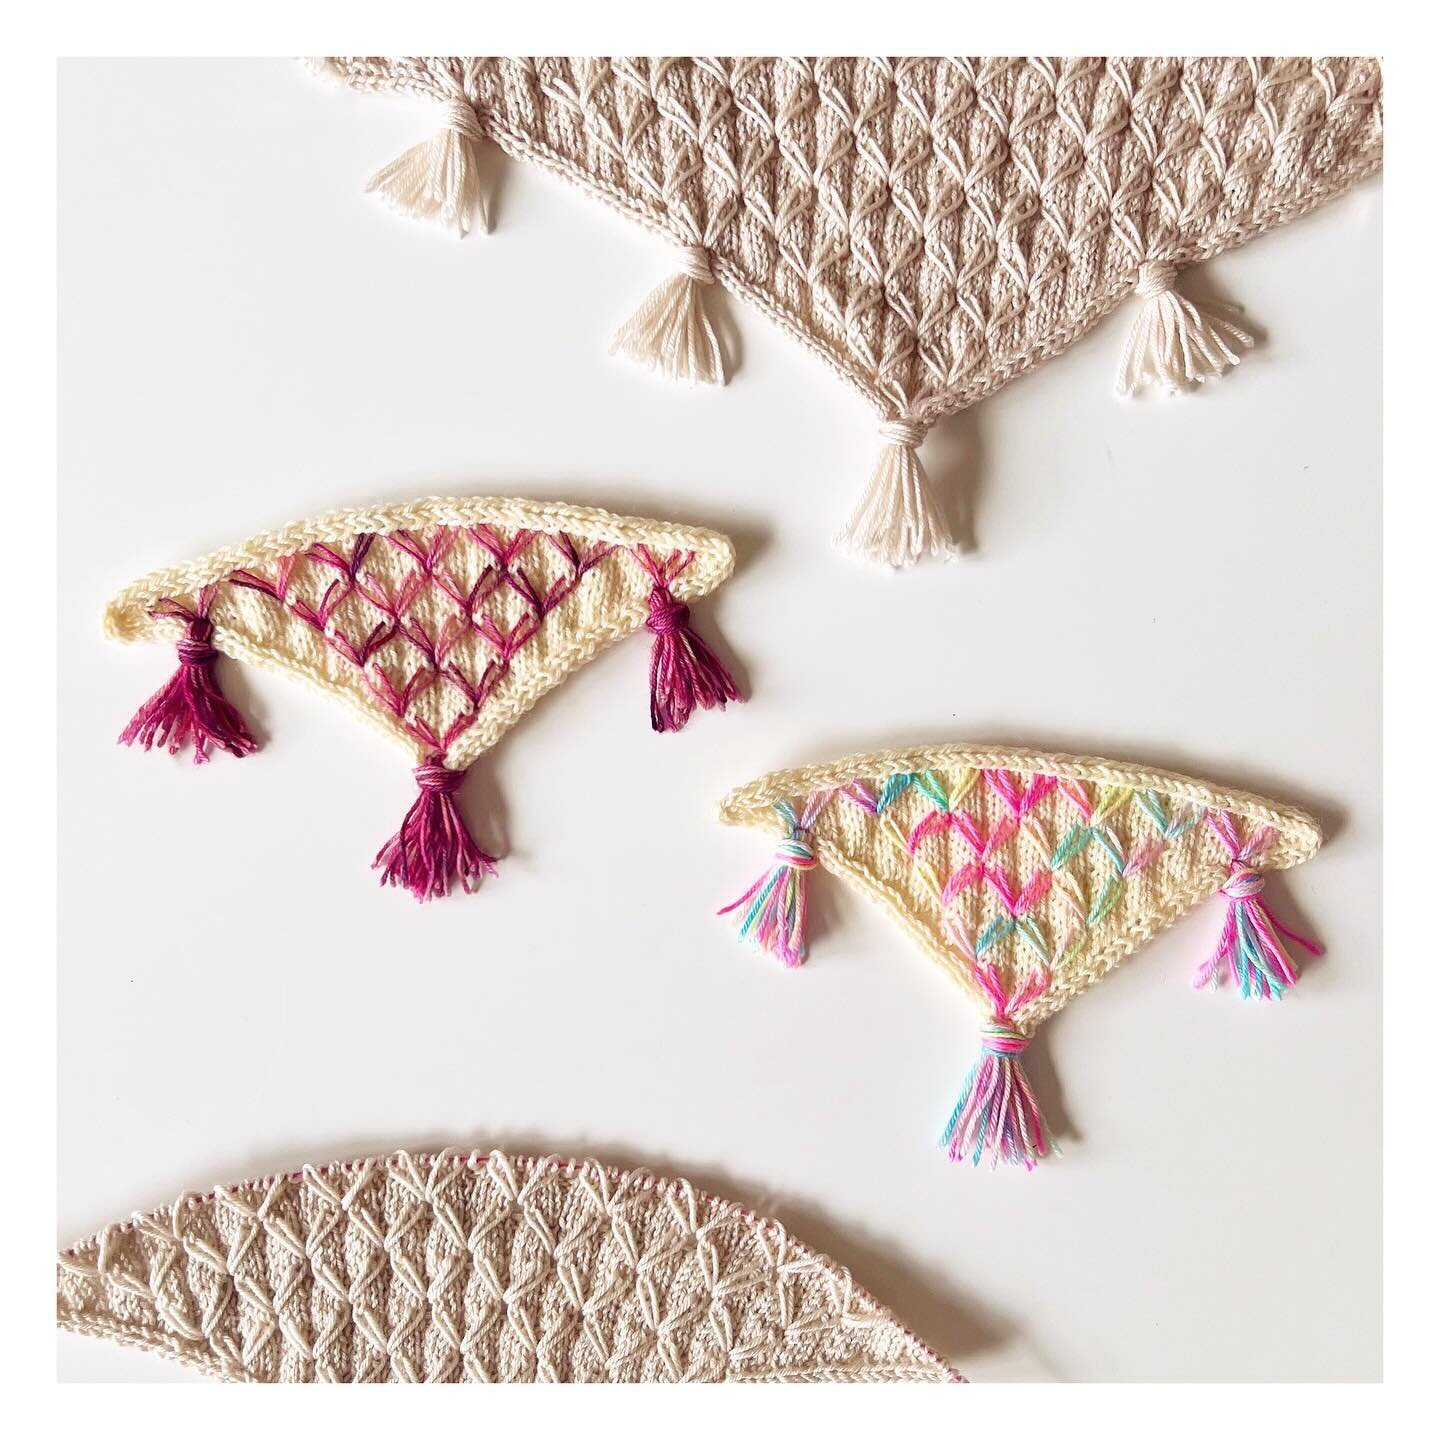 Pattern release of Star Jasmine Shawl is scheduled for this Friday, just in time for the beginning of the @bayareayarncrawl 💕

And as I make final preparations for the release, I wanted to share mini samples of the two-color version with you. It&rsq